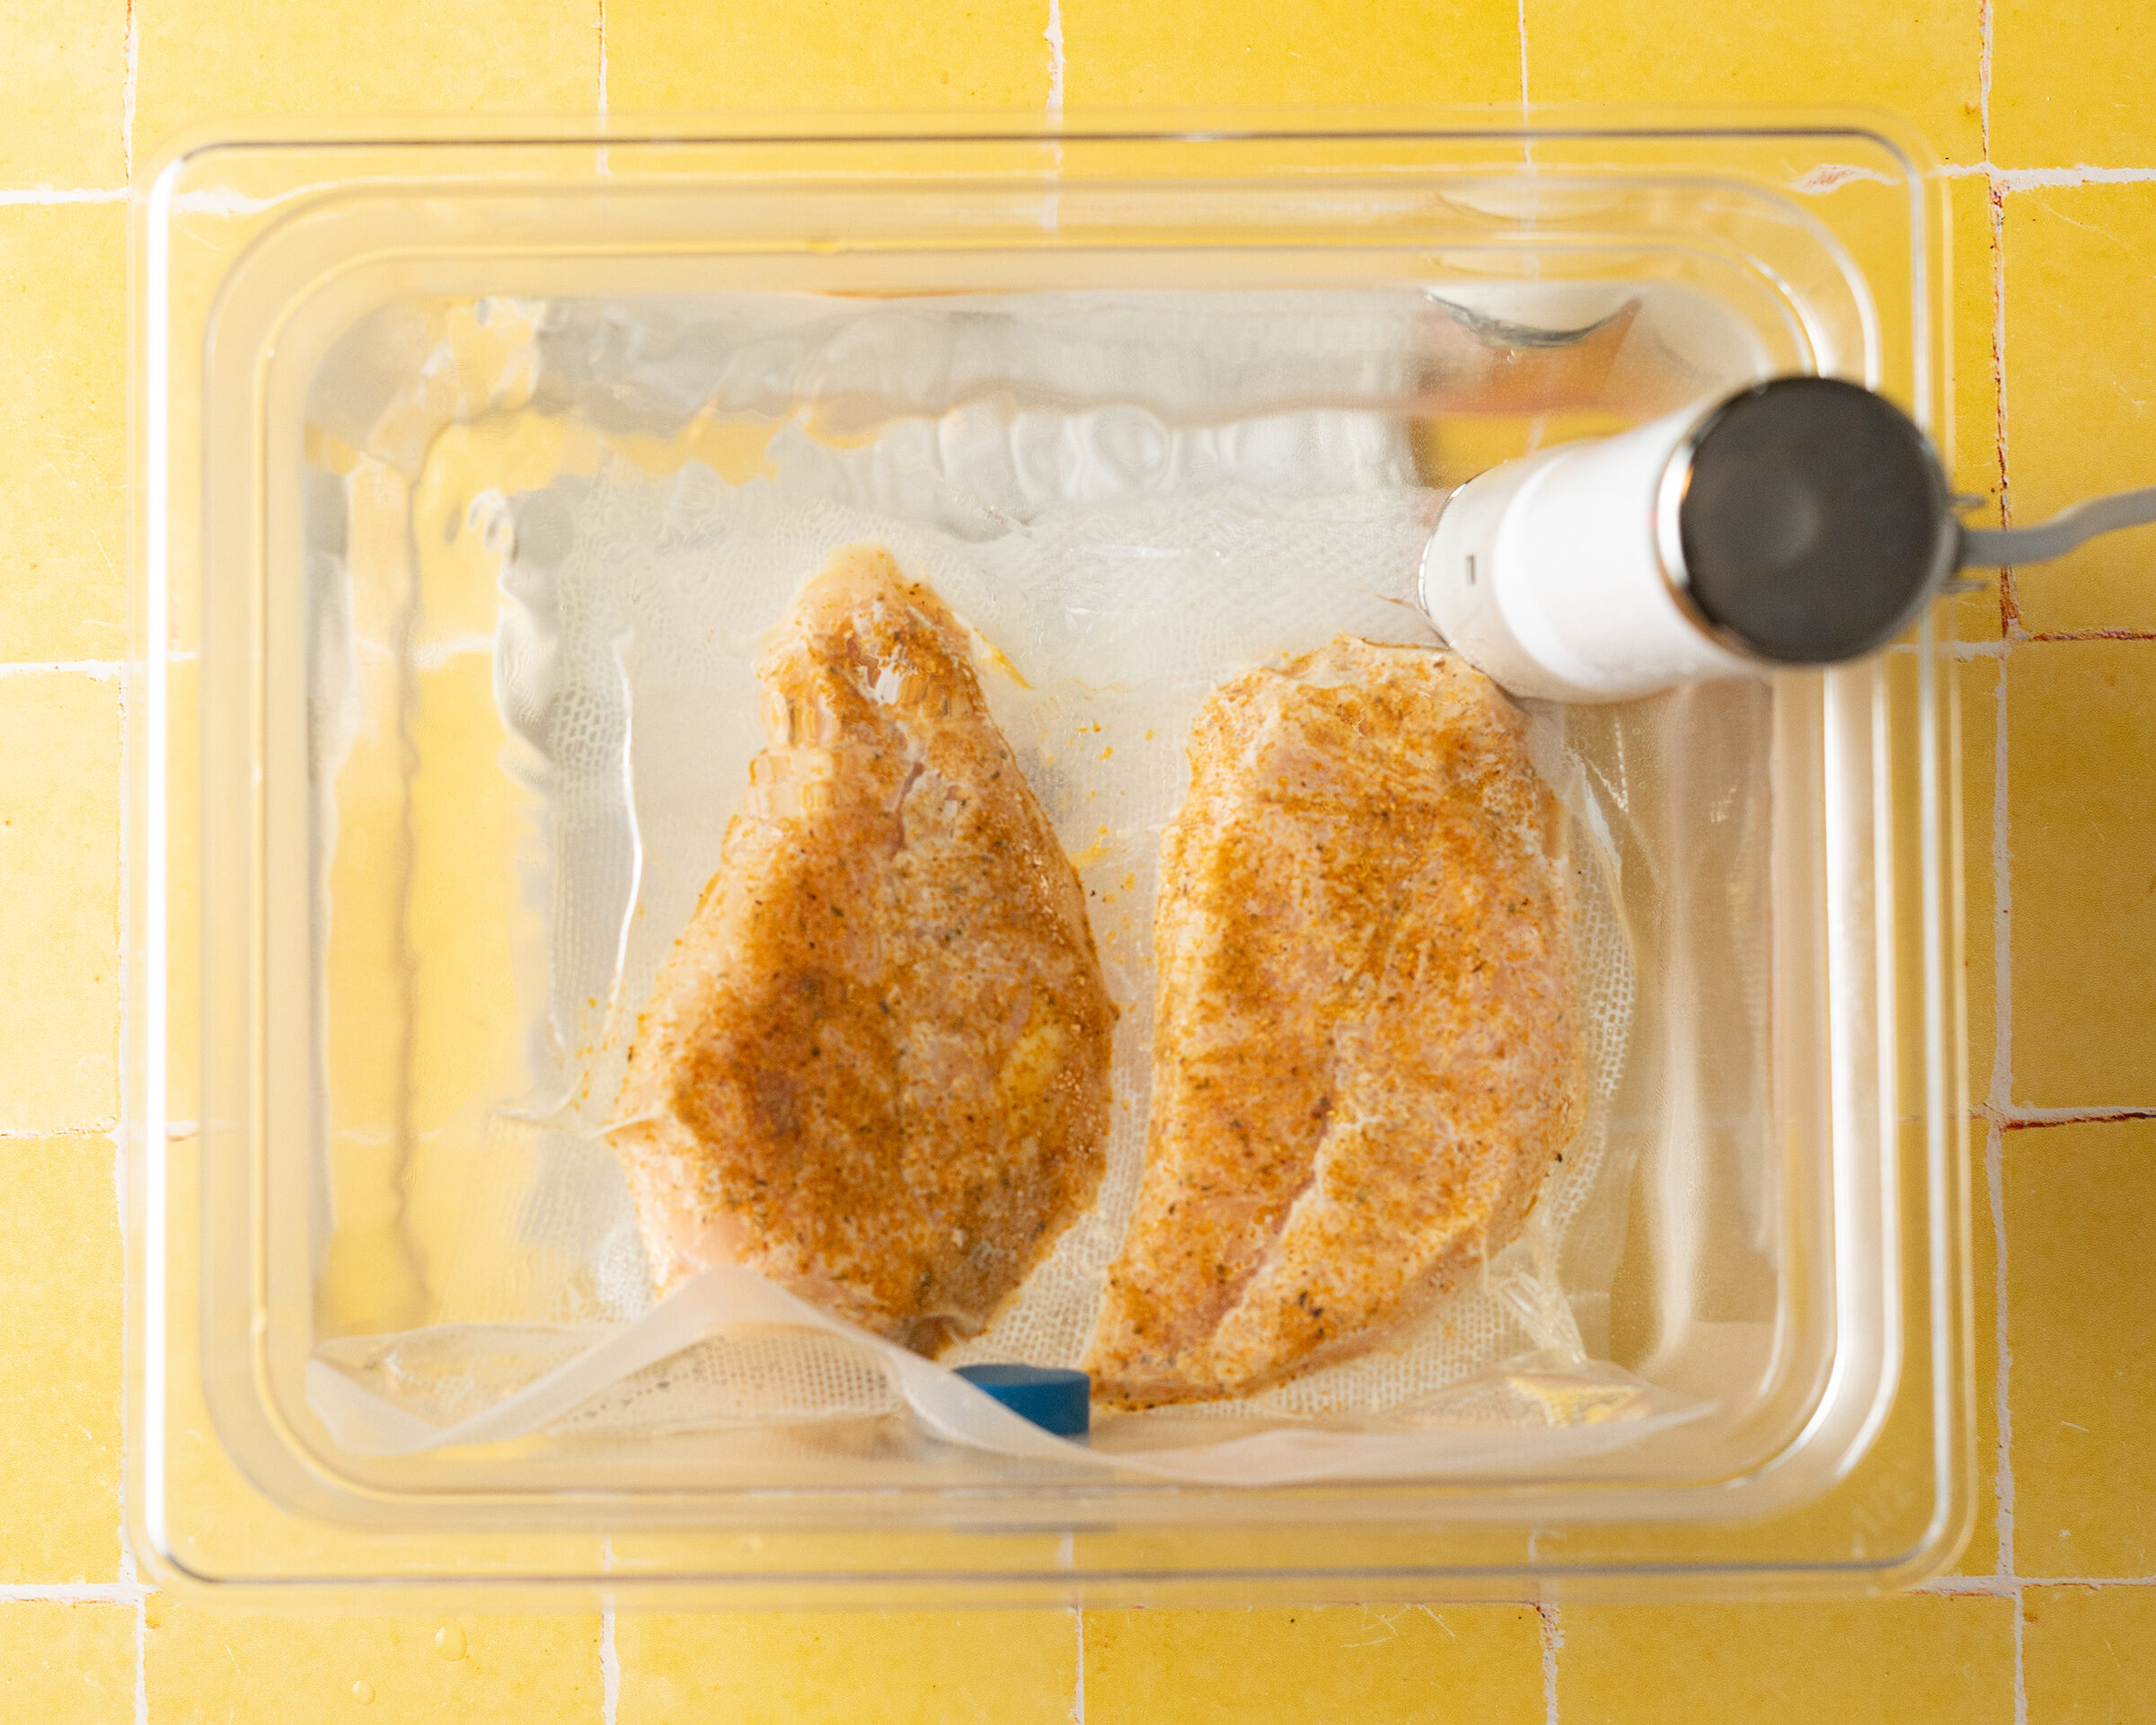 1 Hour Sous Vide Chicken Breasts - A Duck's Oven